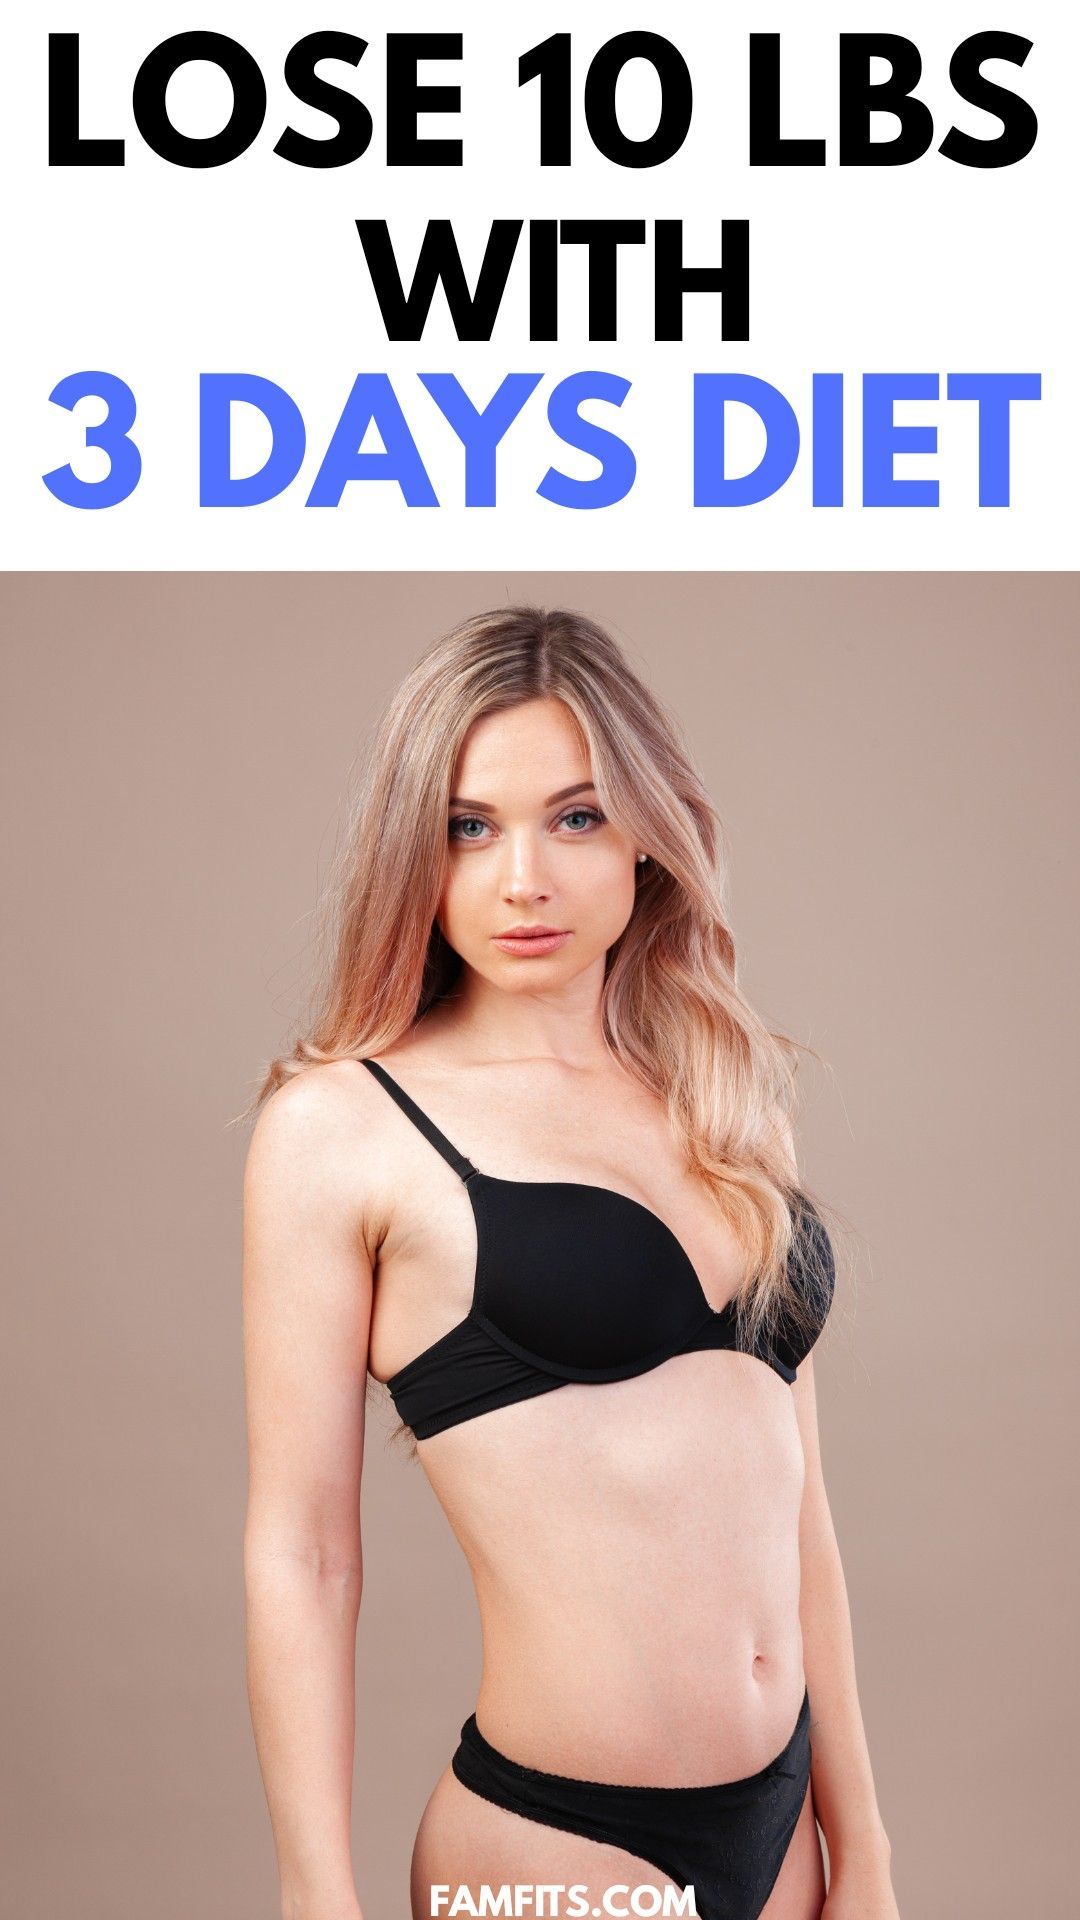 Lose 10 pounds with 3 days diet plan -   9 diet 3 Day motivation ideas